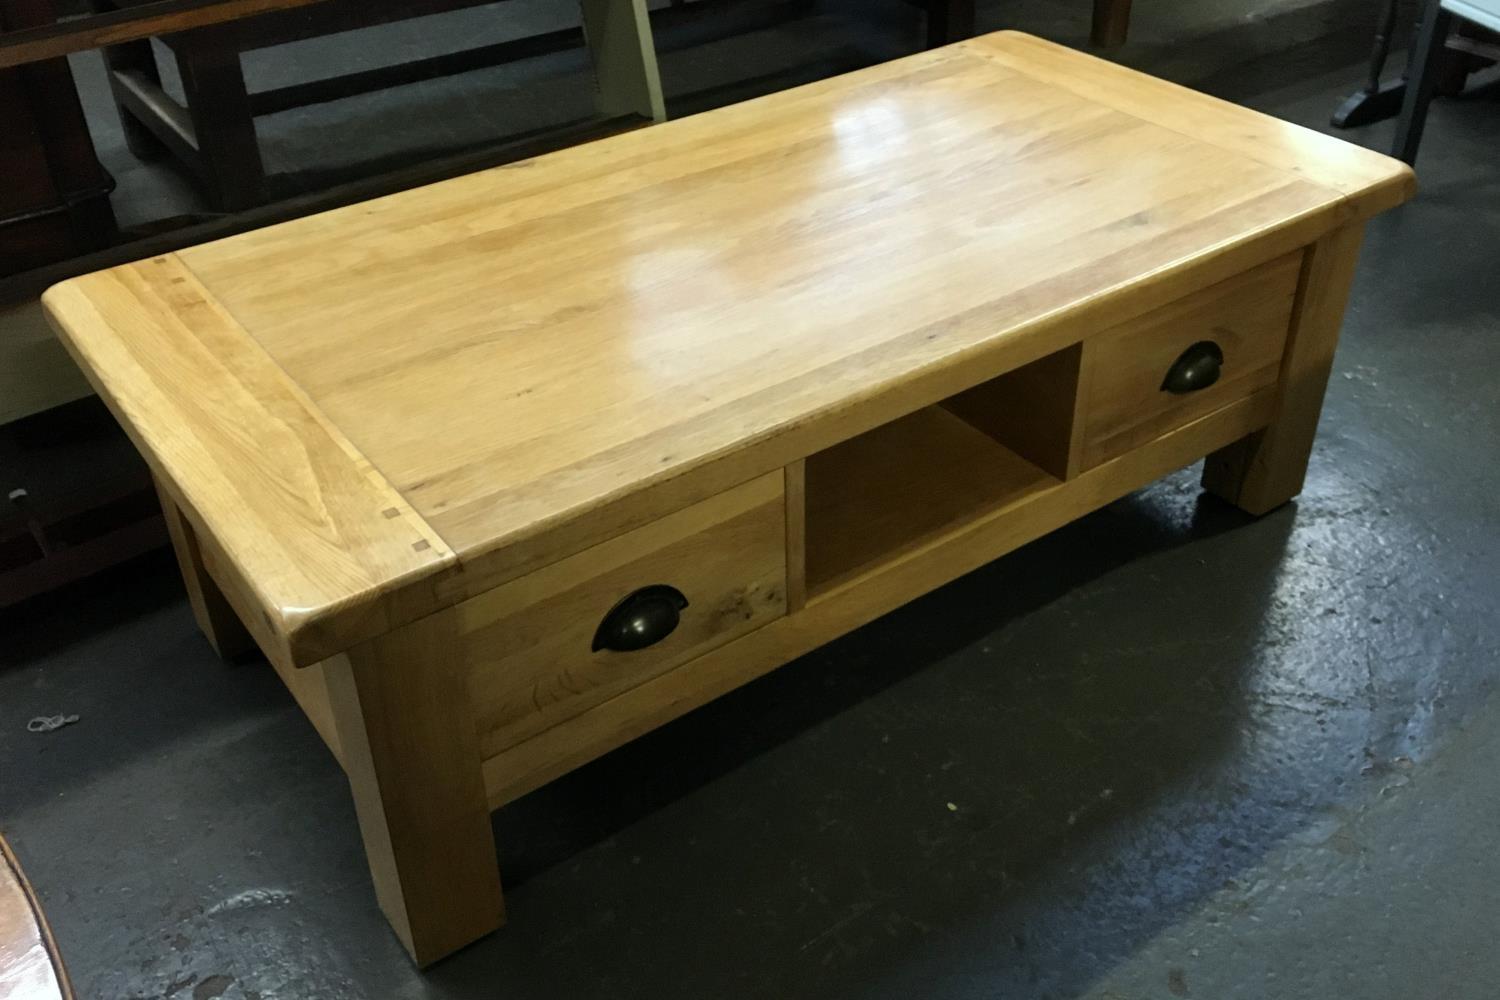 A contemporary blond oak solid coffee table, having two drawers, 120x59x41cmH